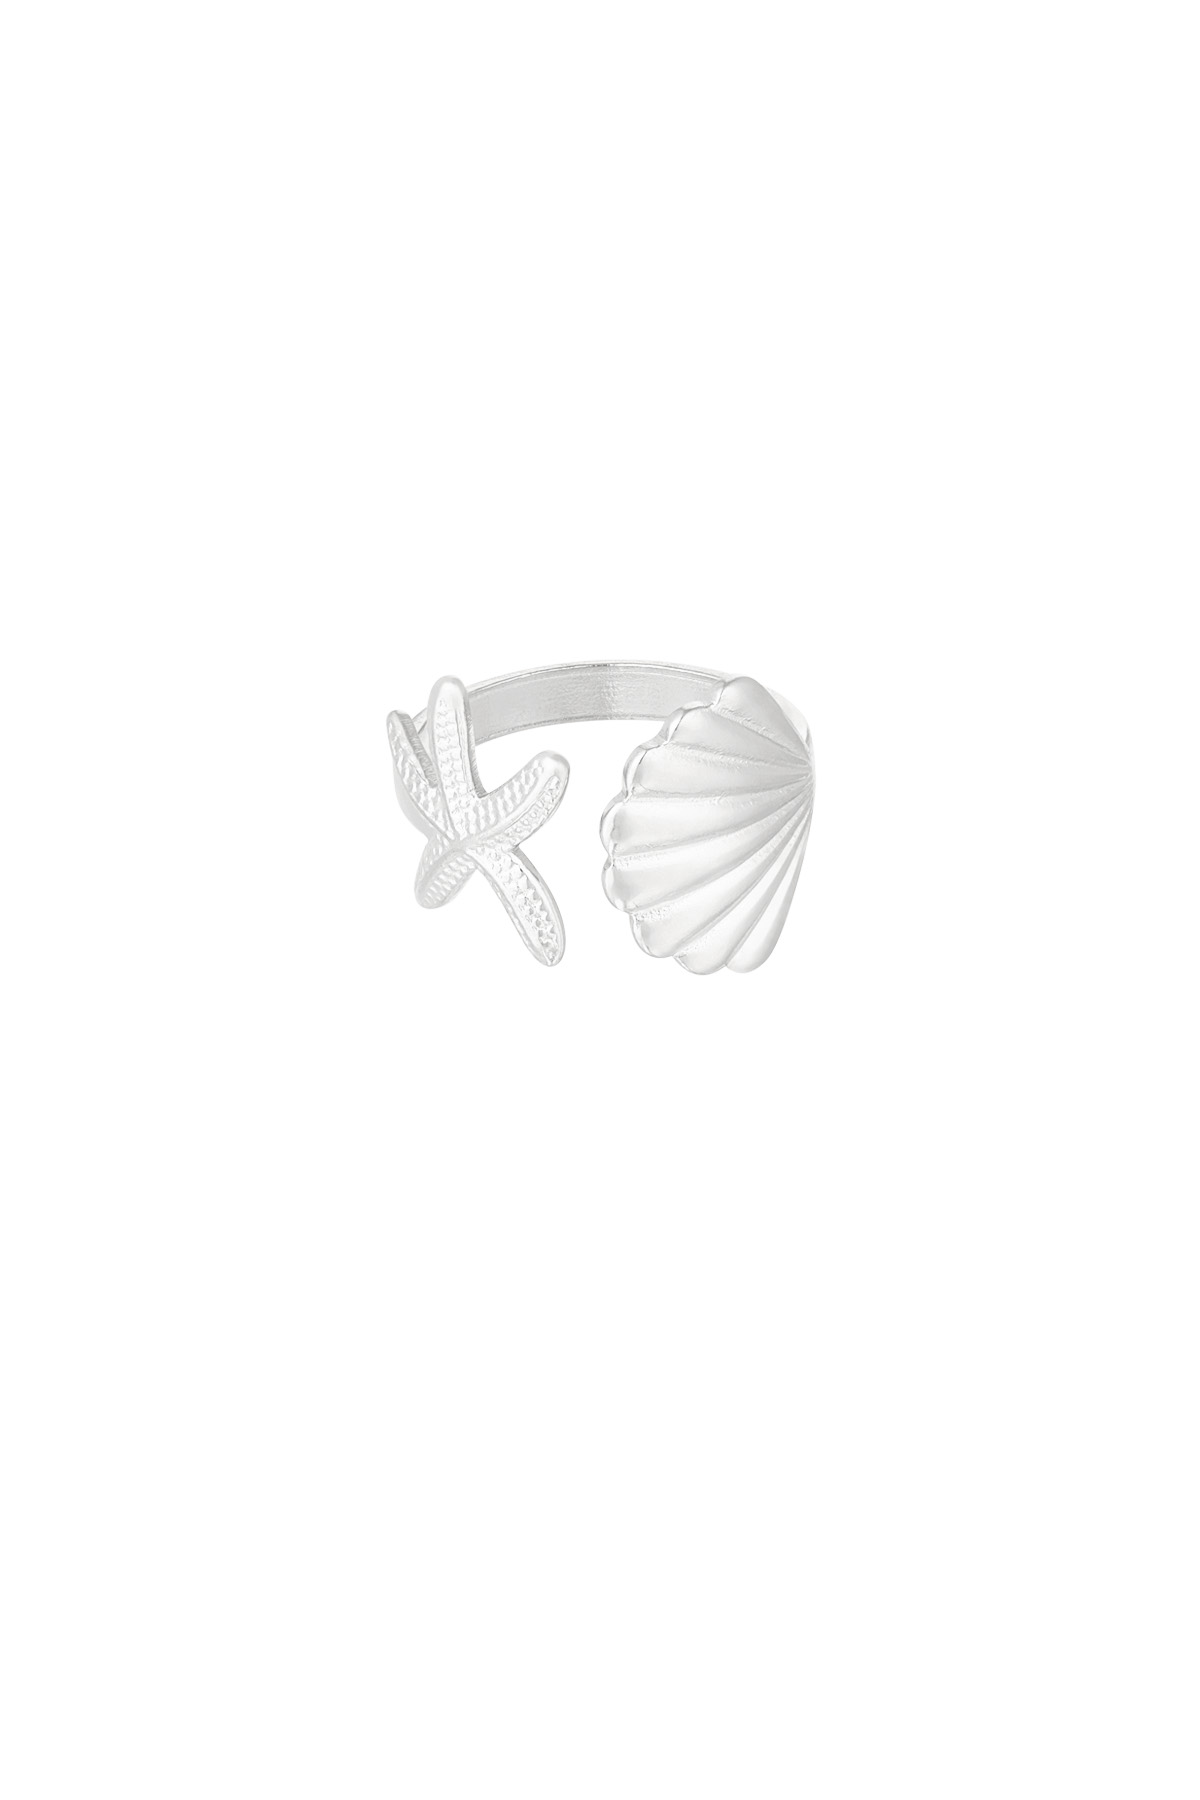 Ring sea shell vibes - zilver h5 